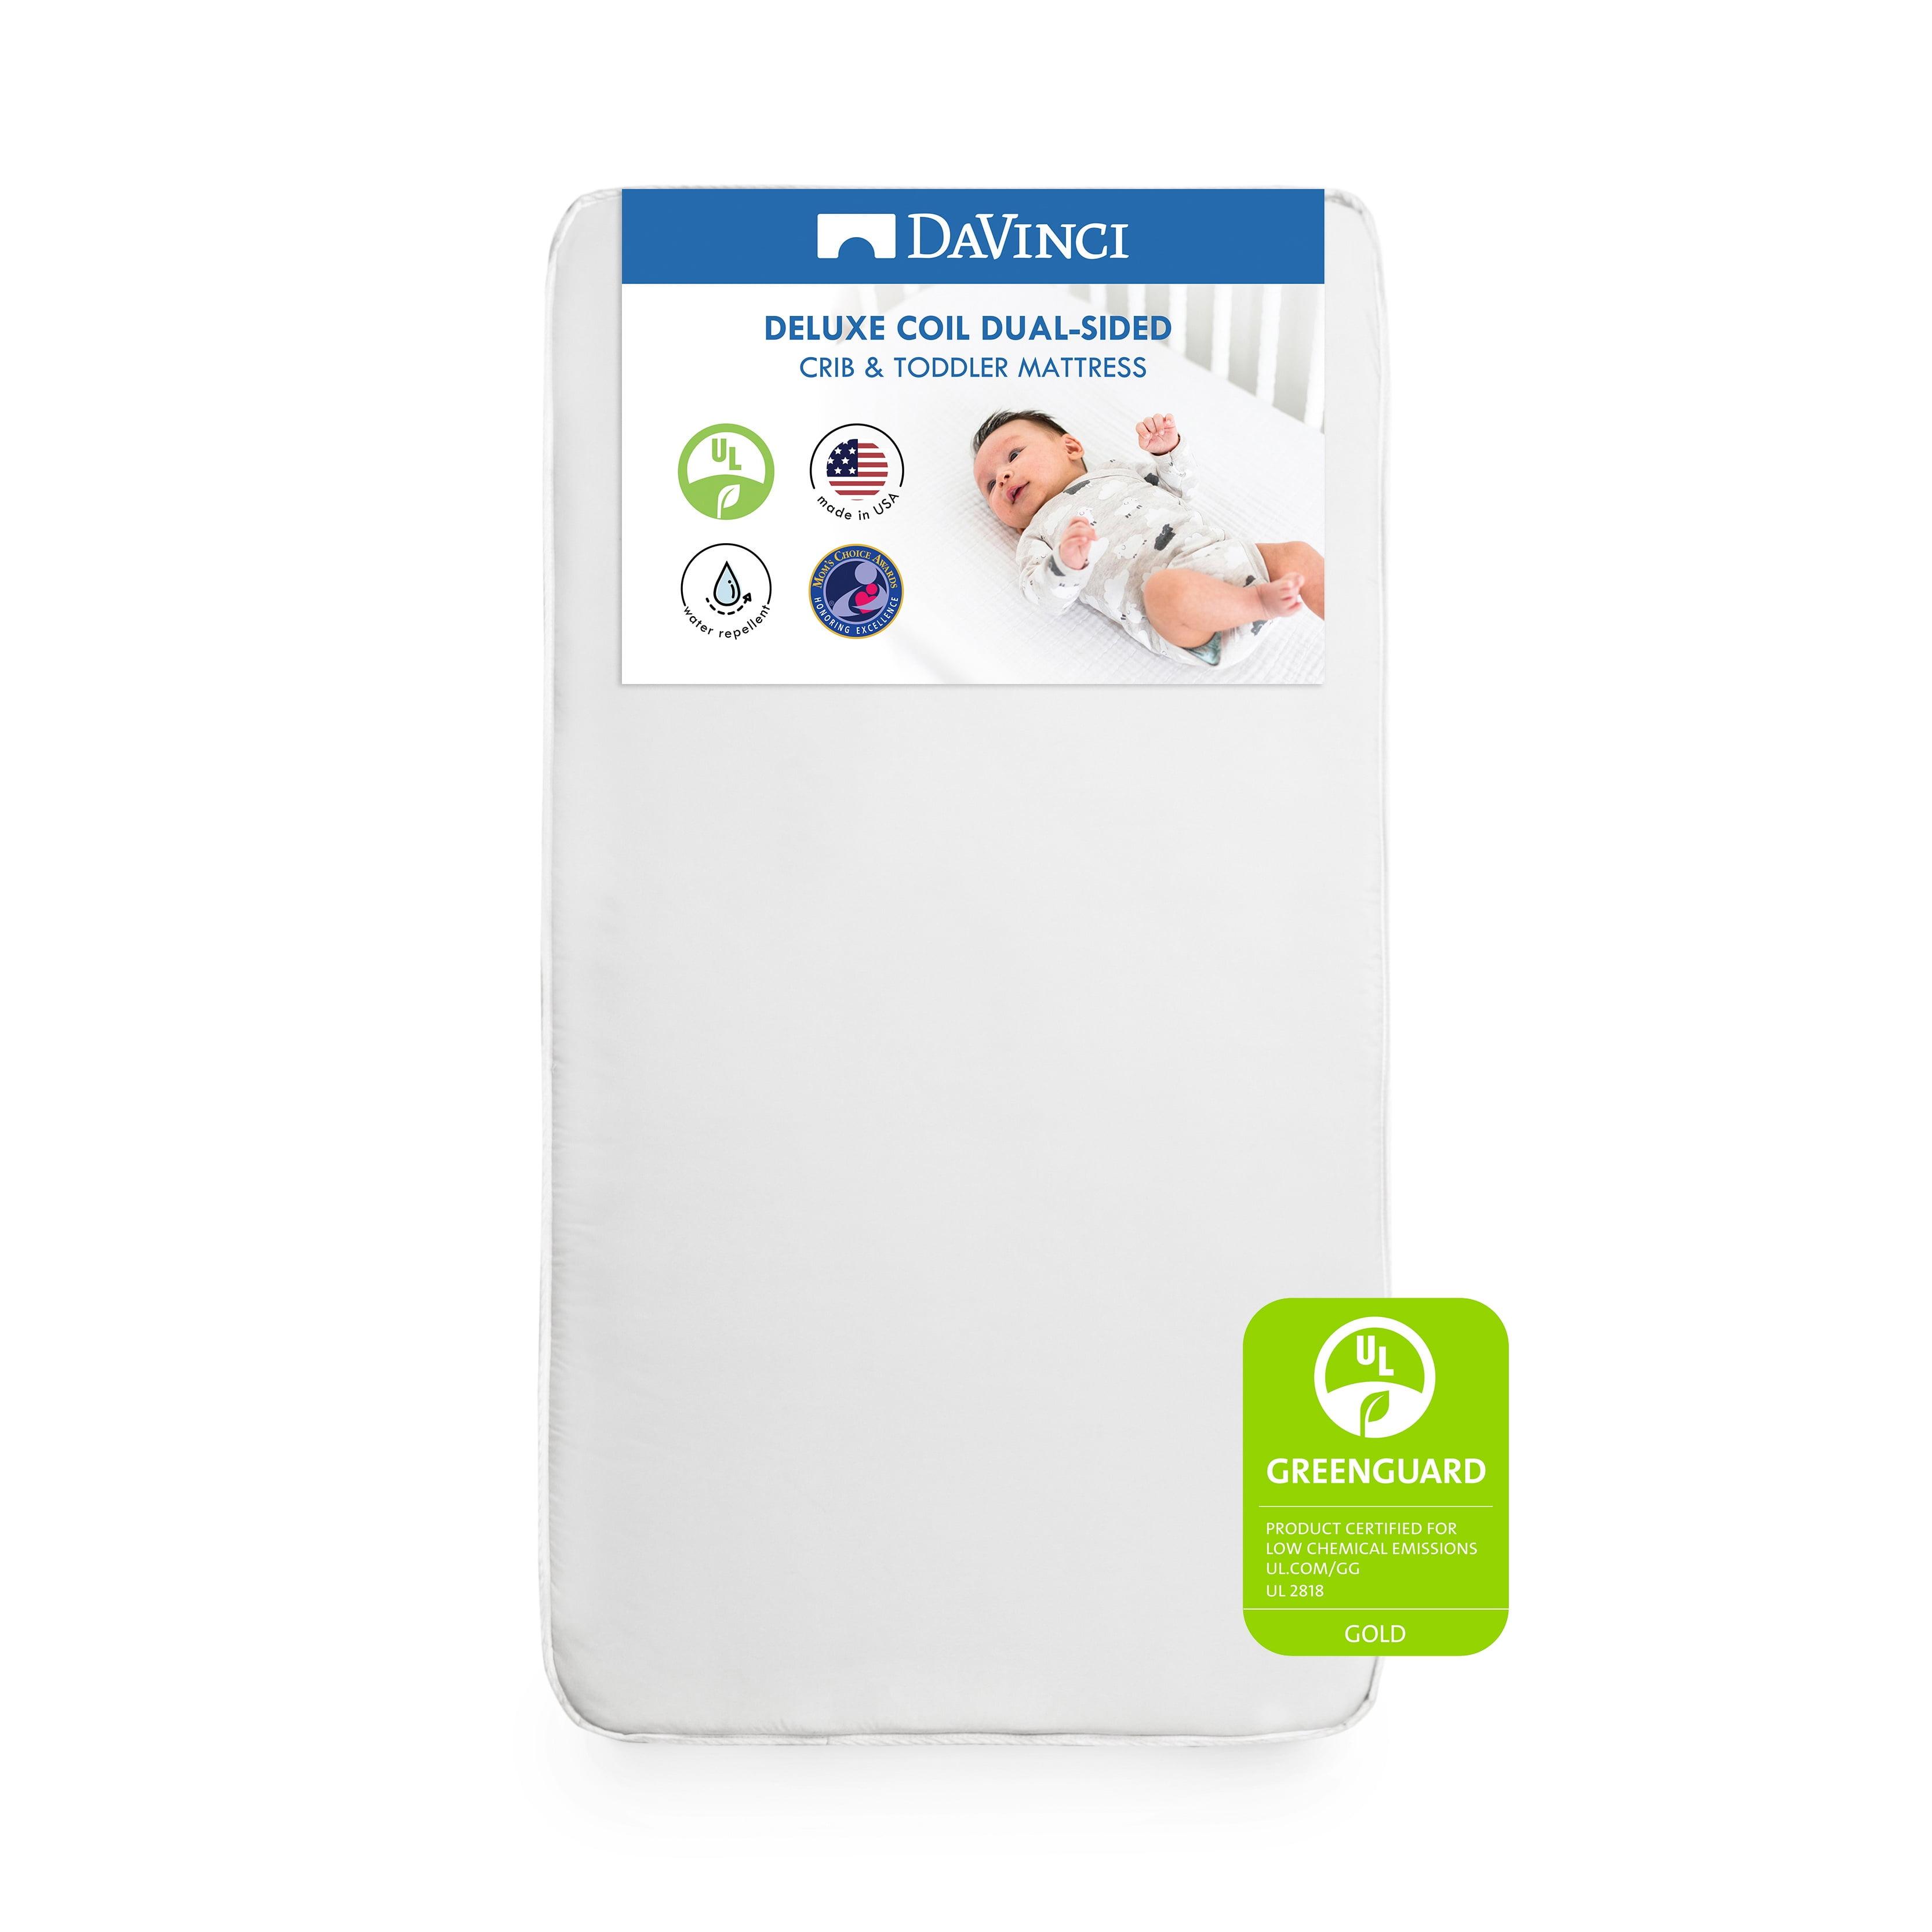 DaVinci Deluxe Dual-Sided Crib and Toddler Mattress